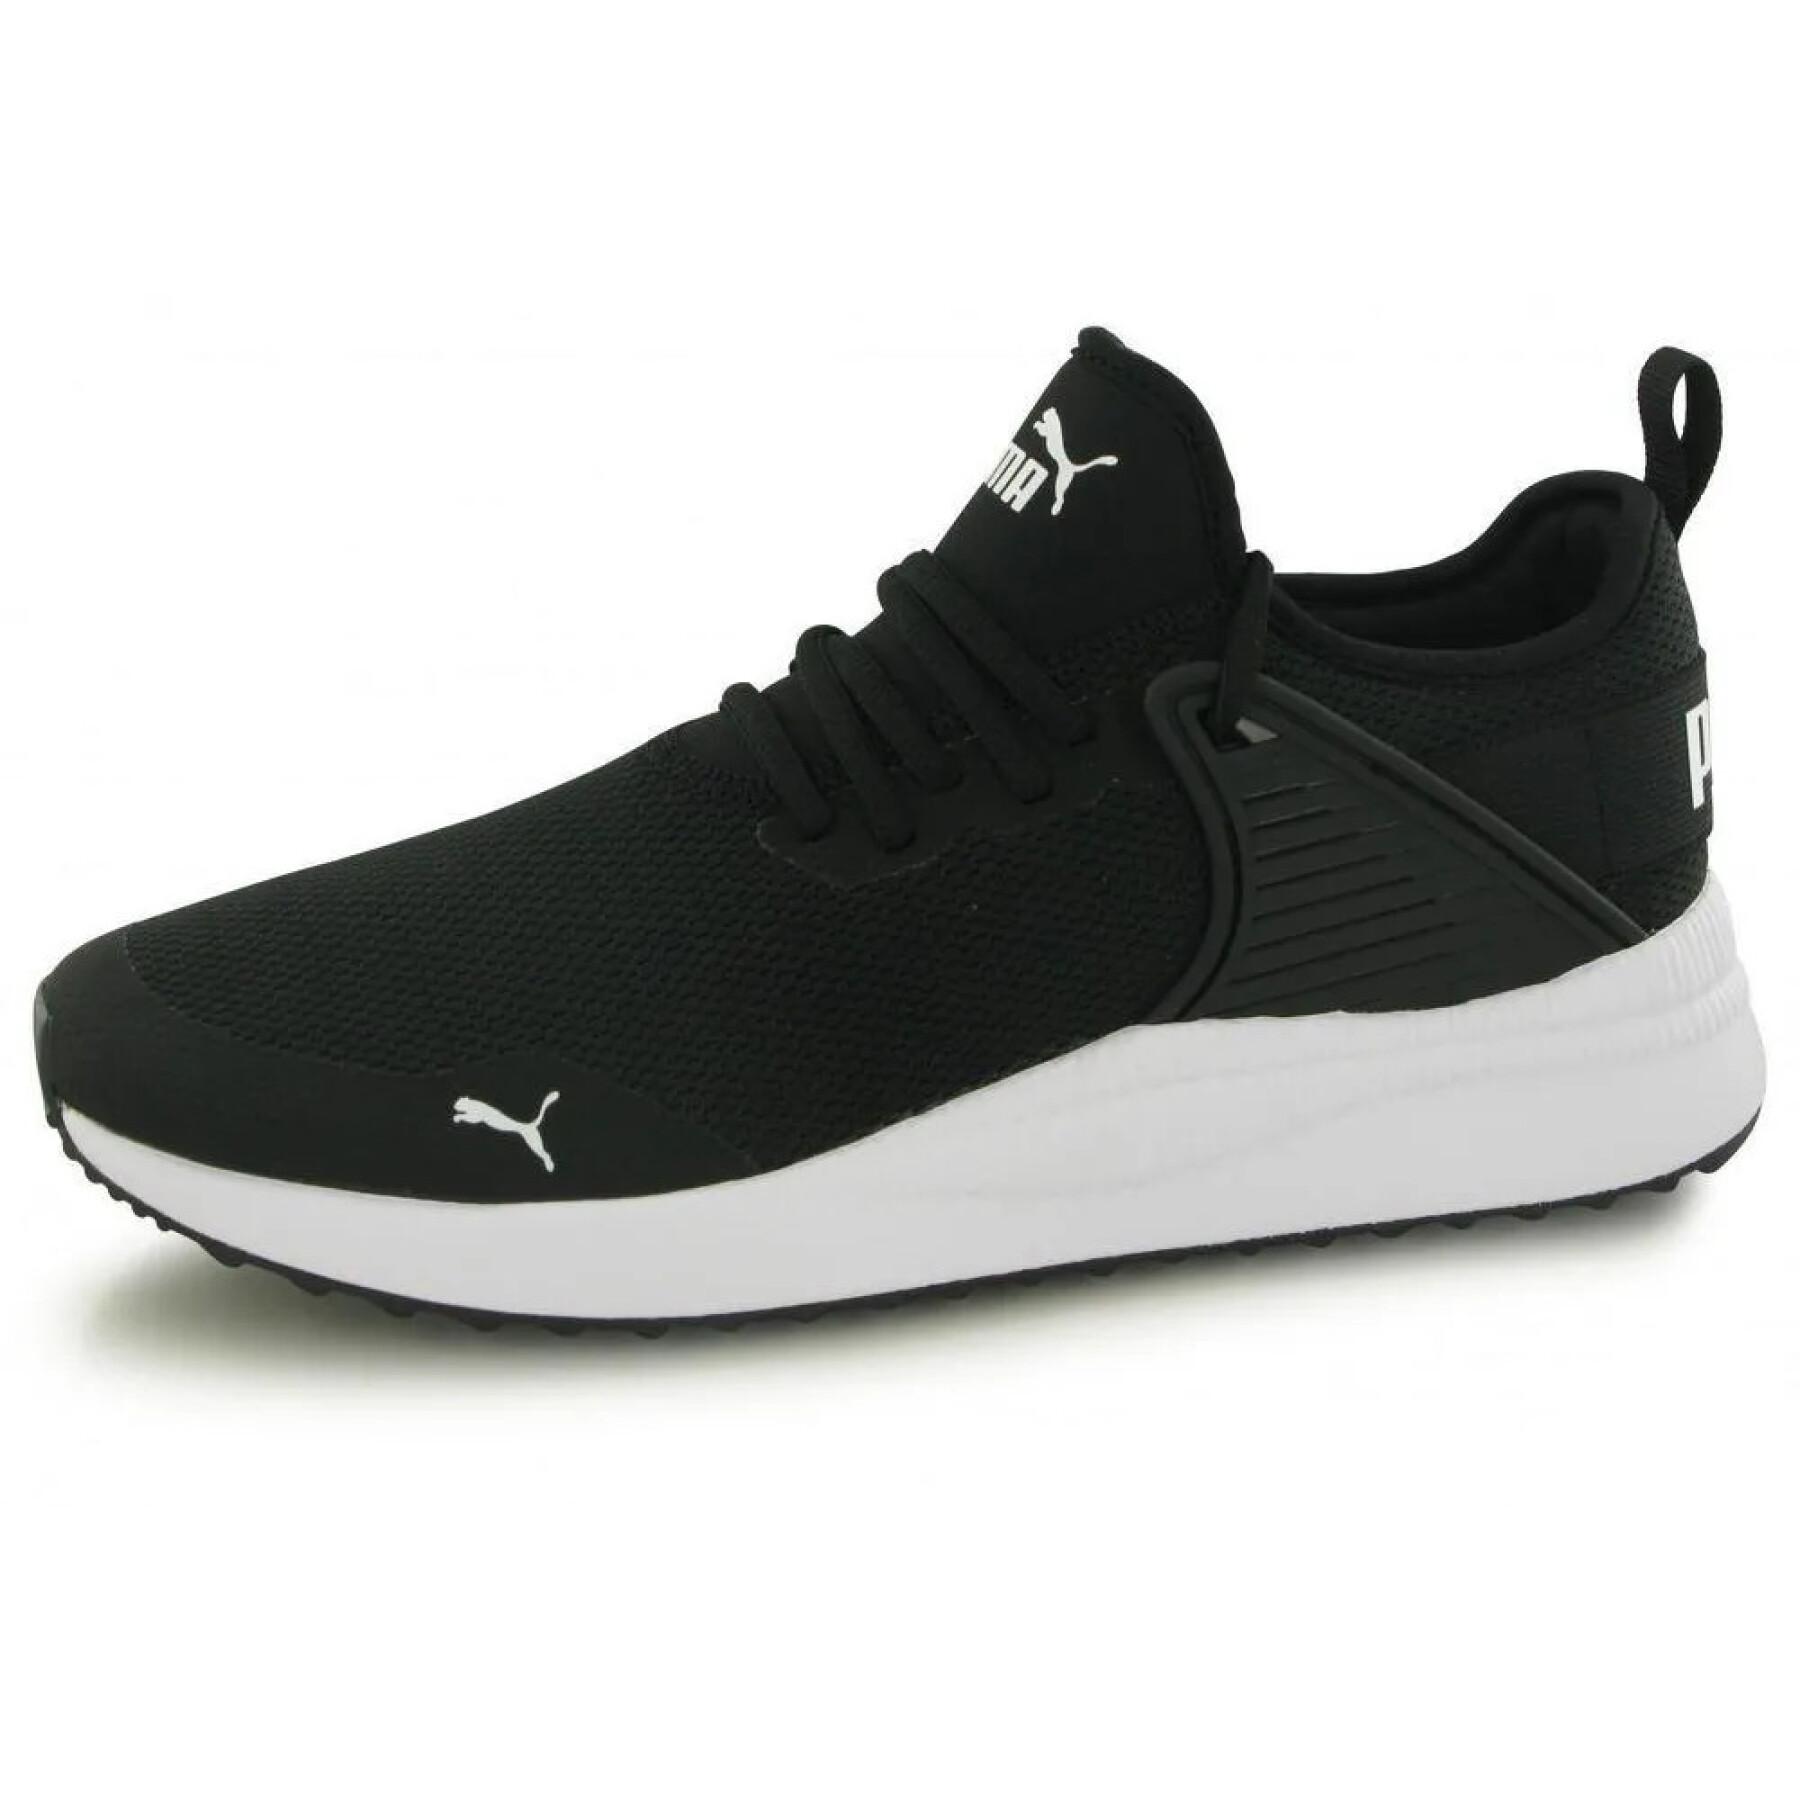 Chaussures de running Puma Pacer next cage core